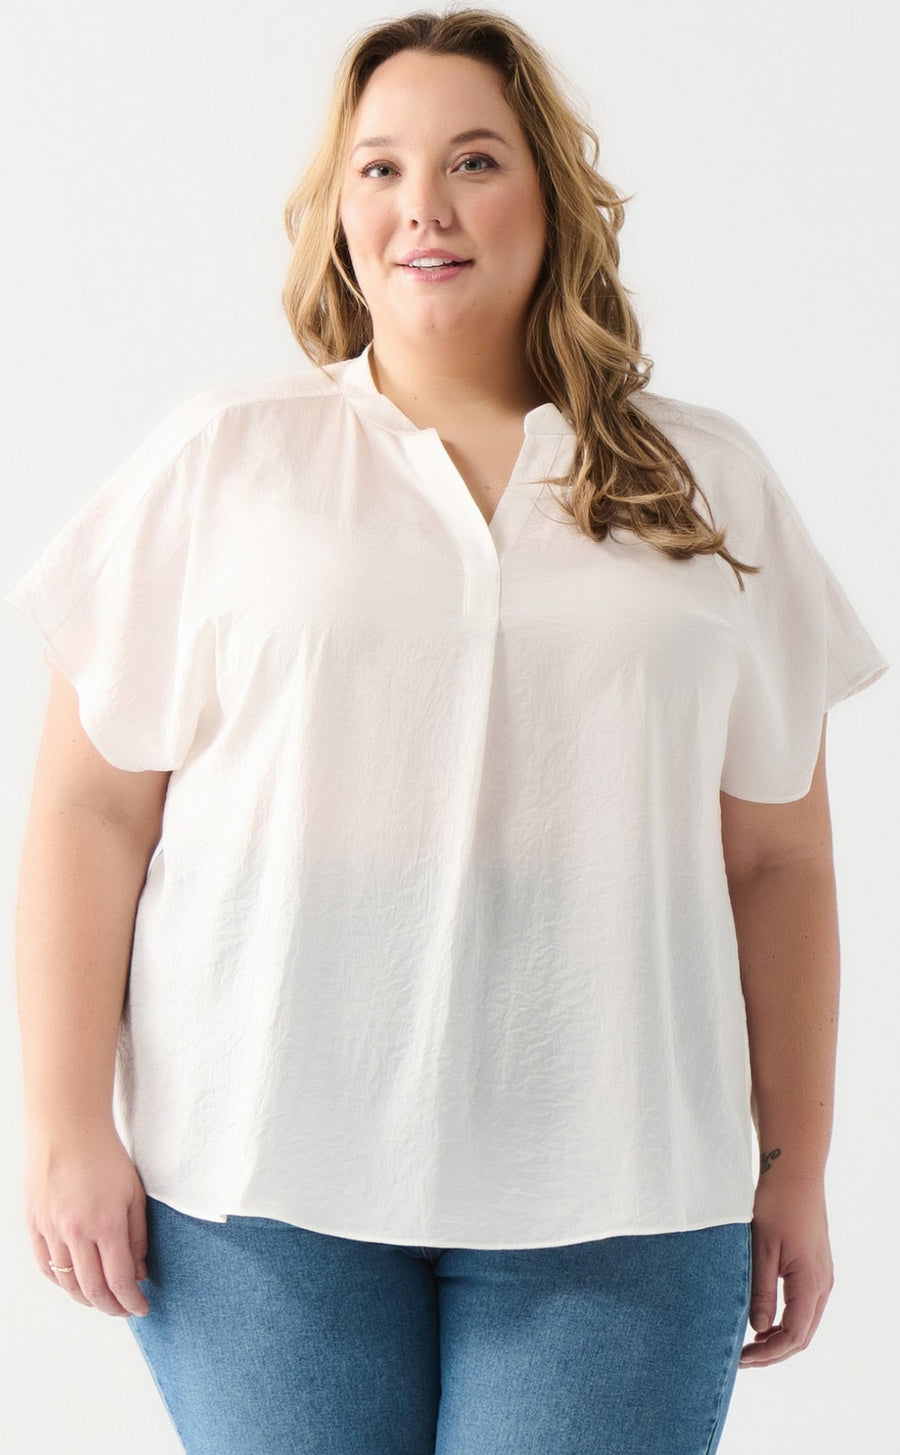 Plus sized satin top by Black Tape - Blue Sky Fashions & Lingerie